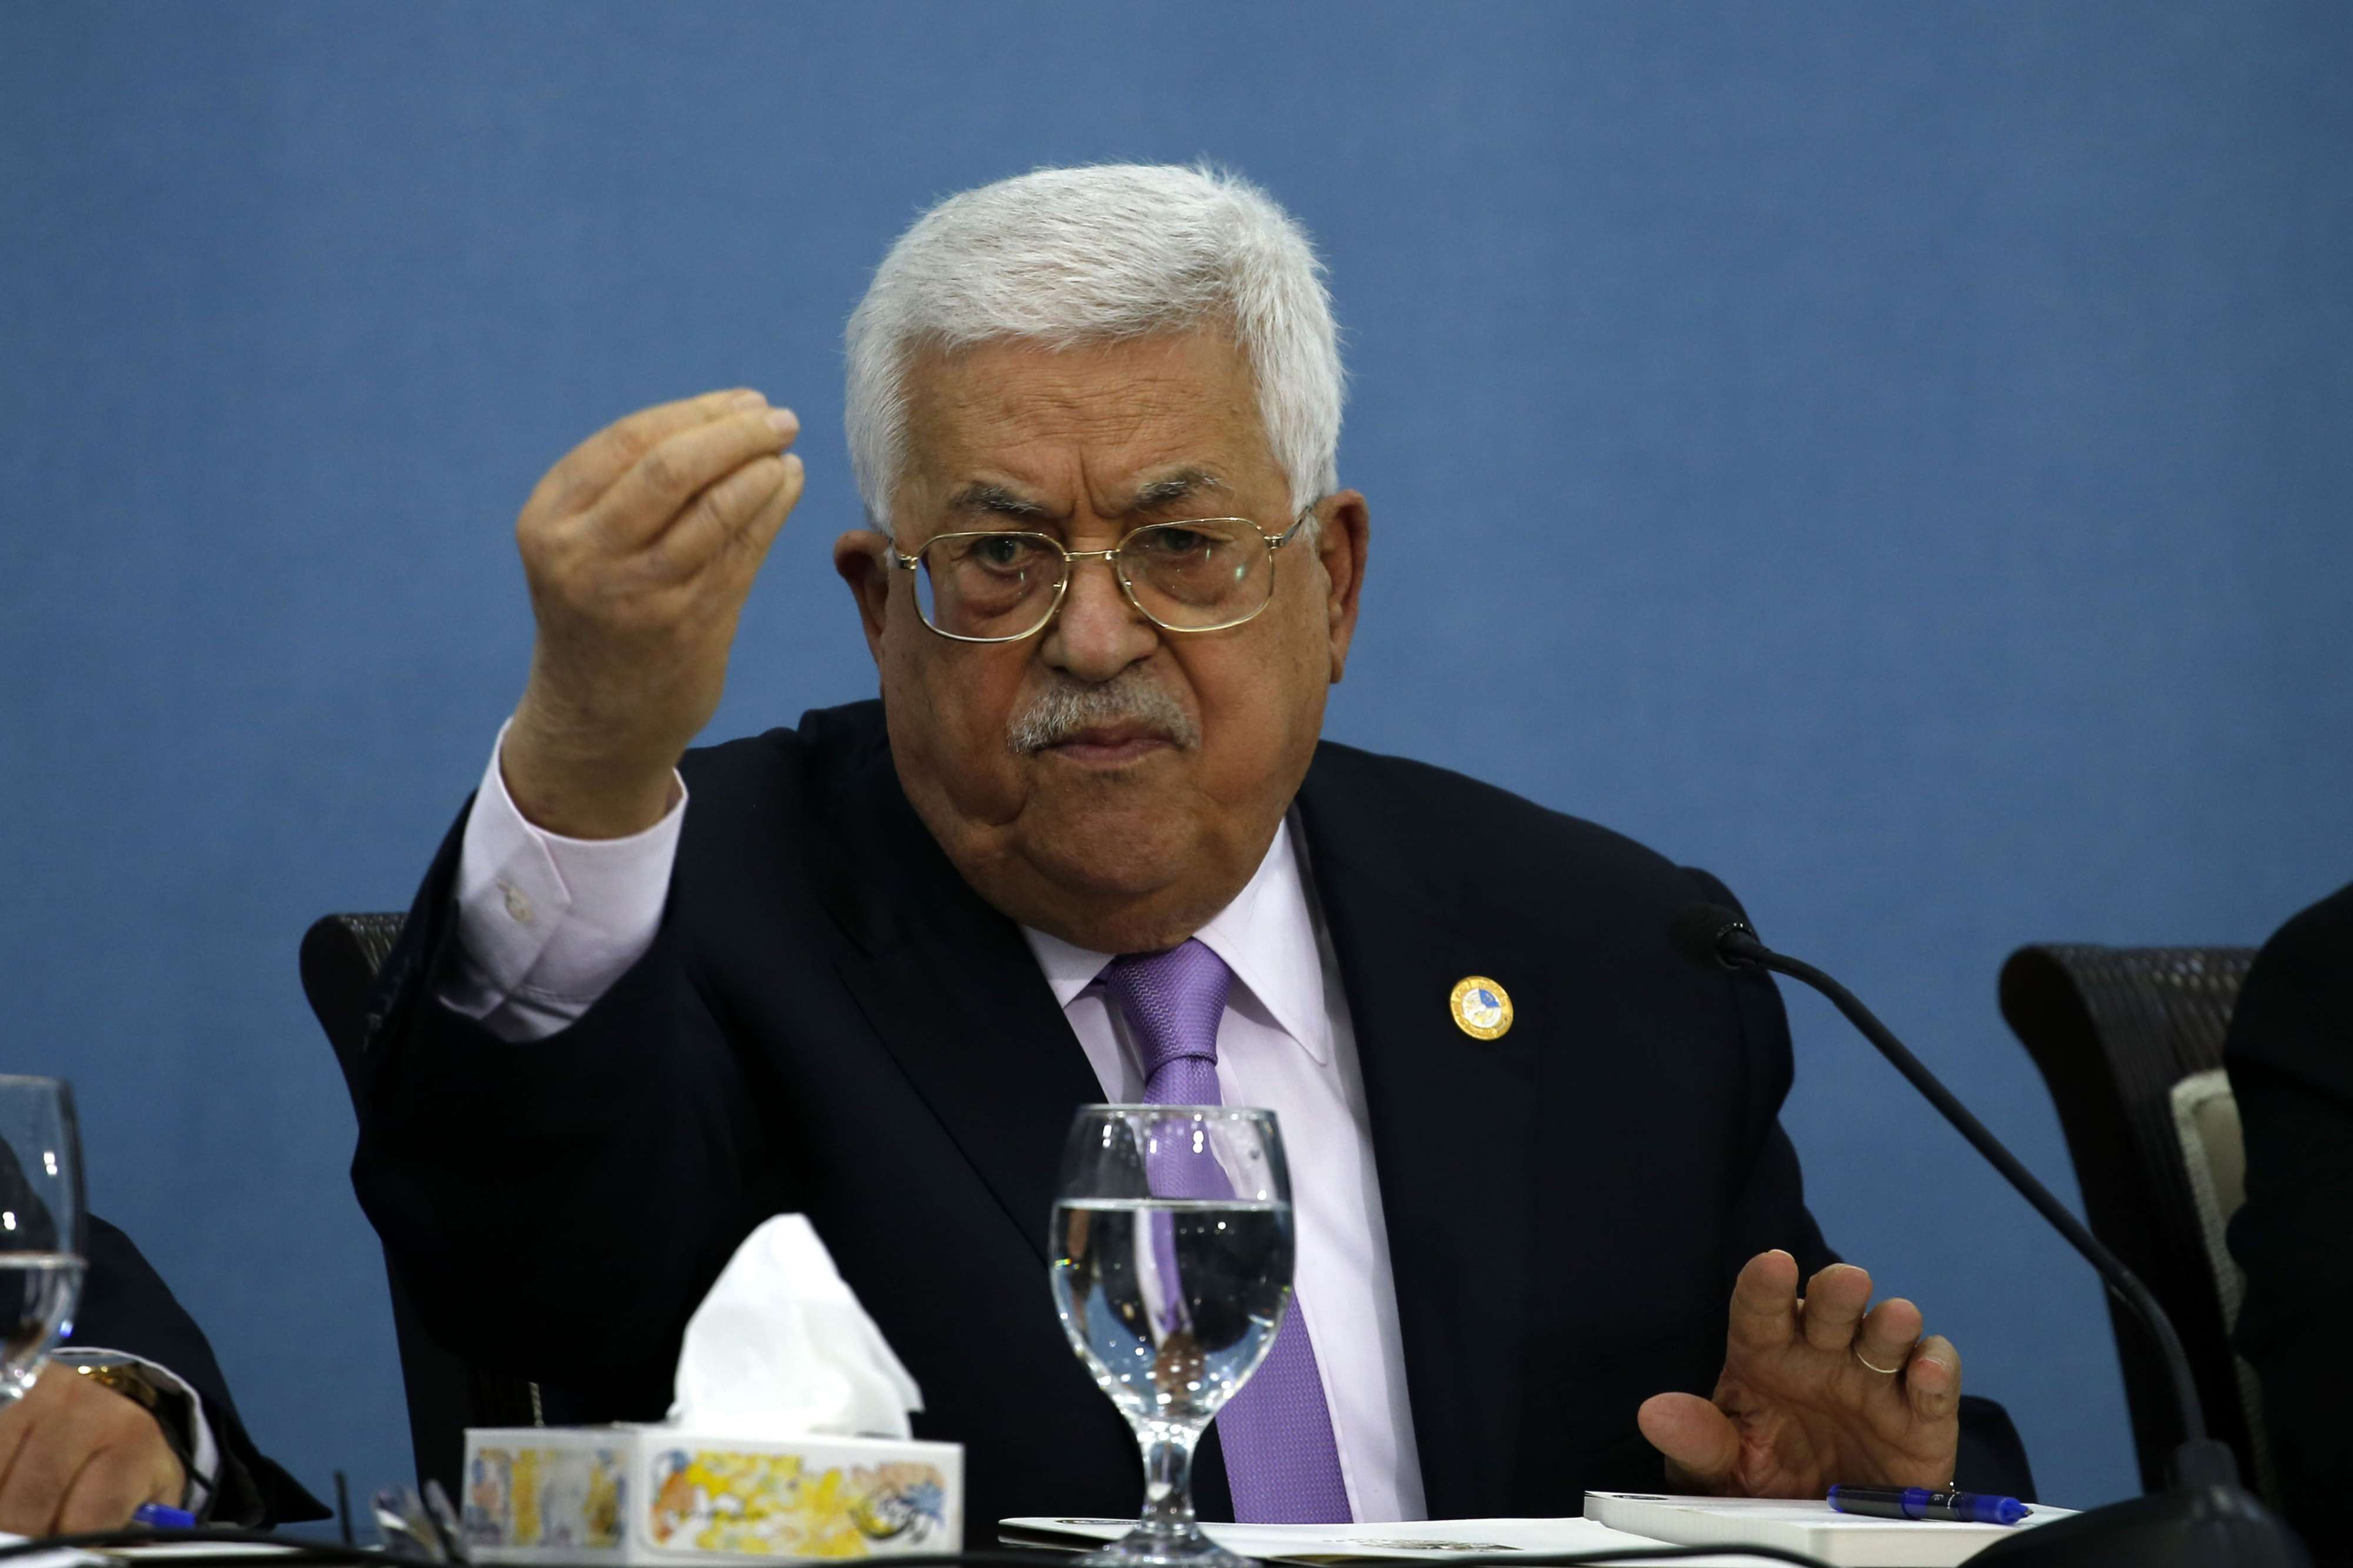 Abbas has accused Israel of blackmail and refused to take any of the tax transfers, which account for some 65 percent of PA revenues